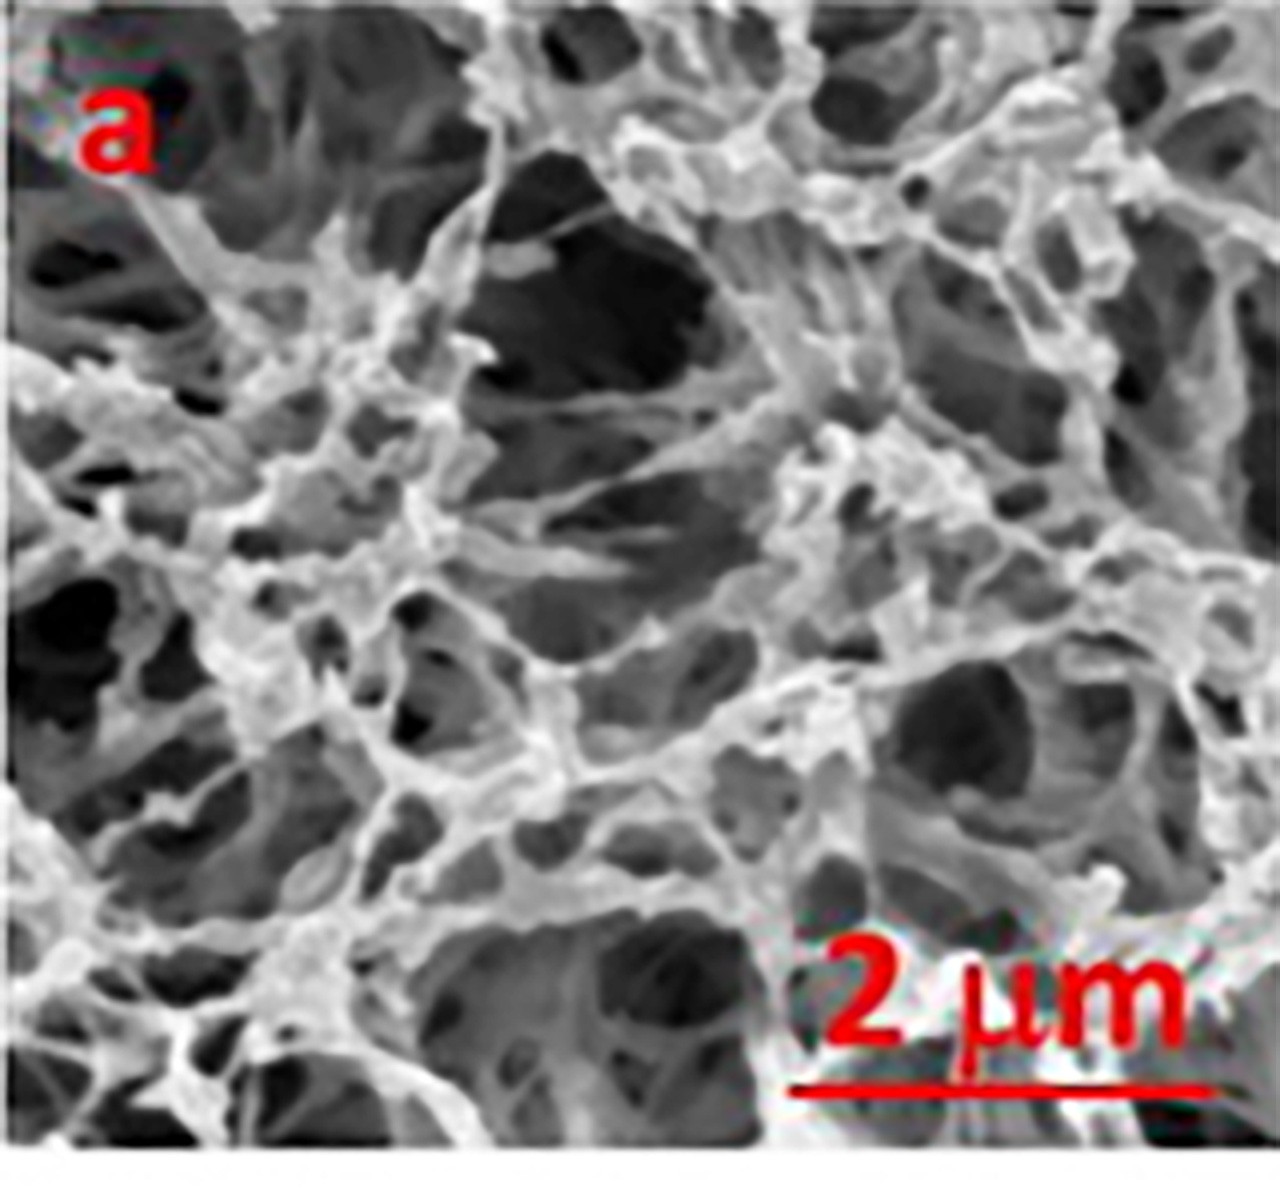 2nm microscope image of porous nanostructured material